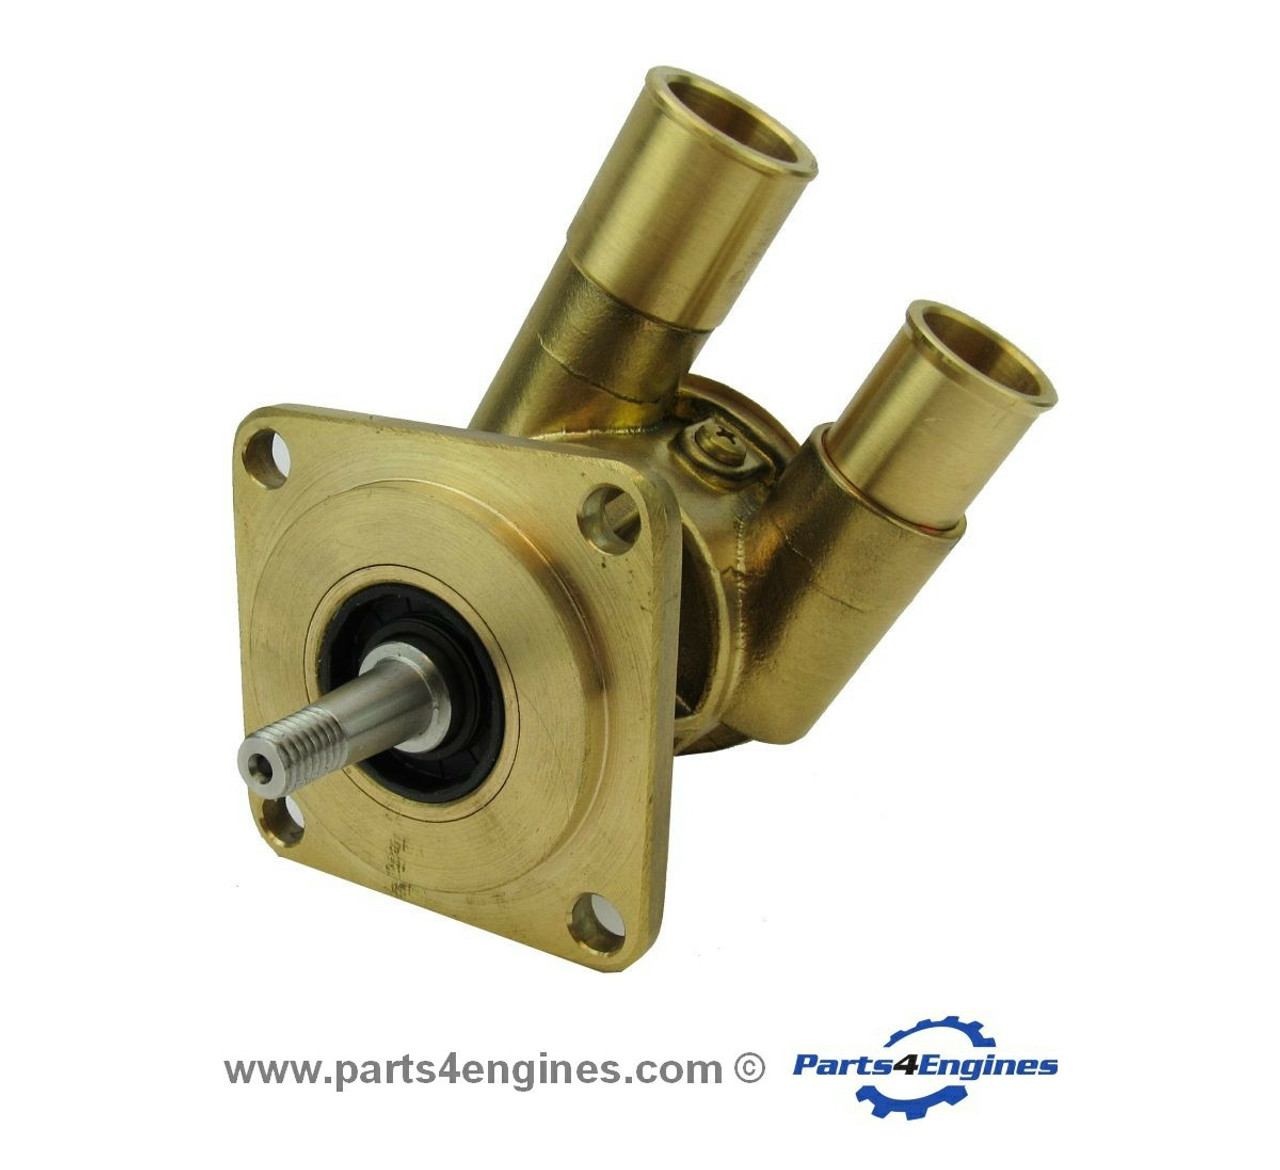 Volvo Penta D2-75 Raw Water Pump from parts4engines.com